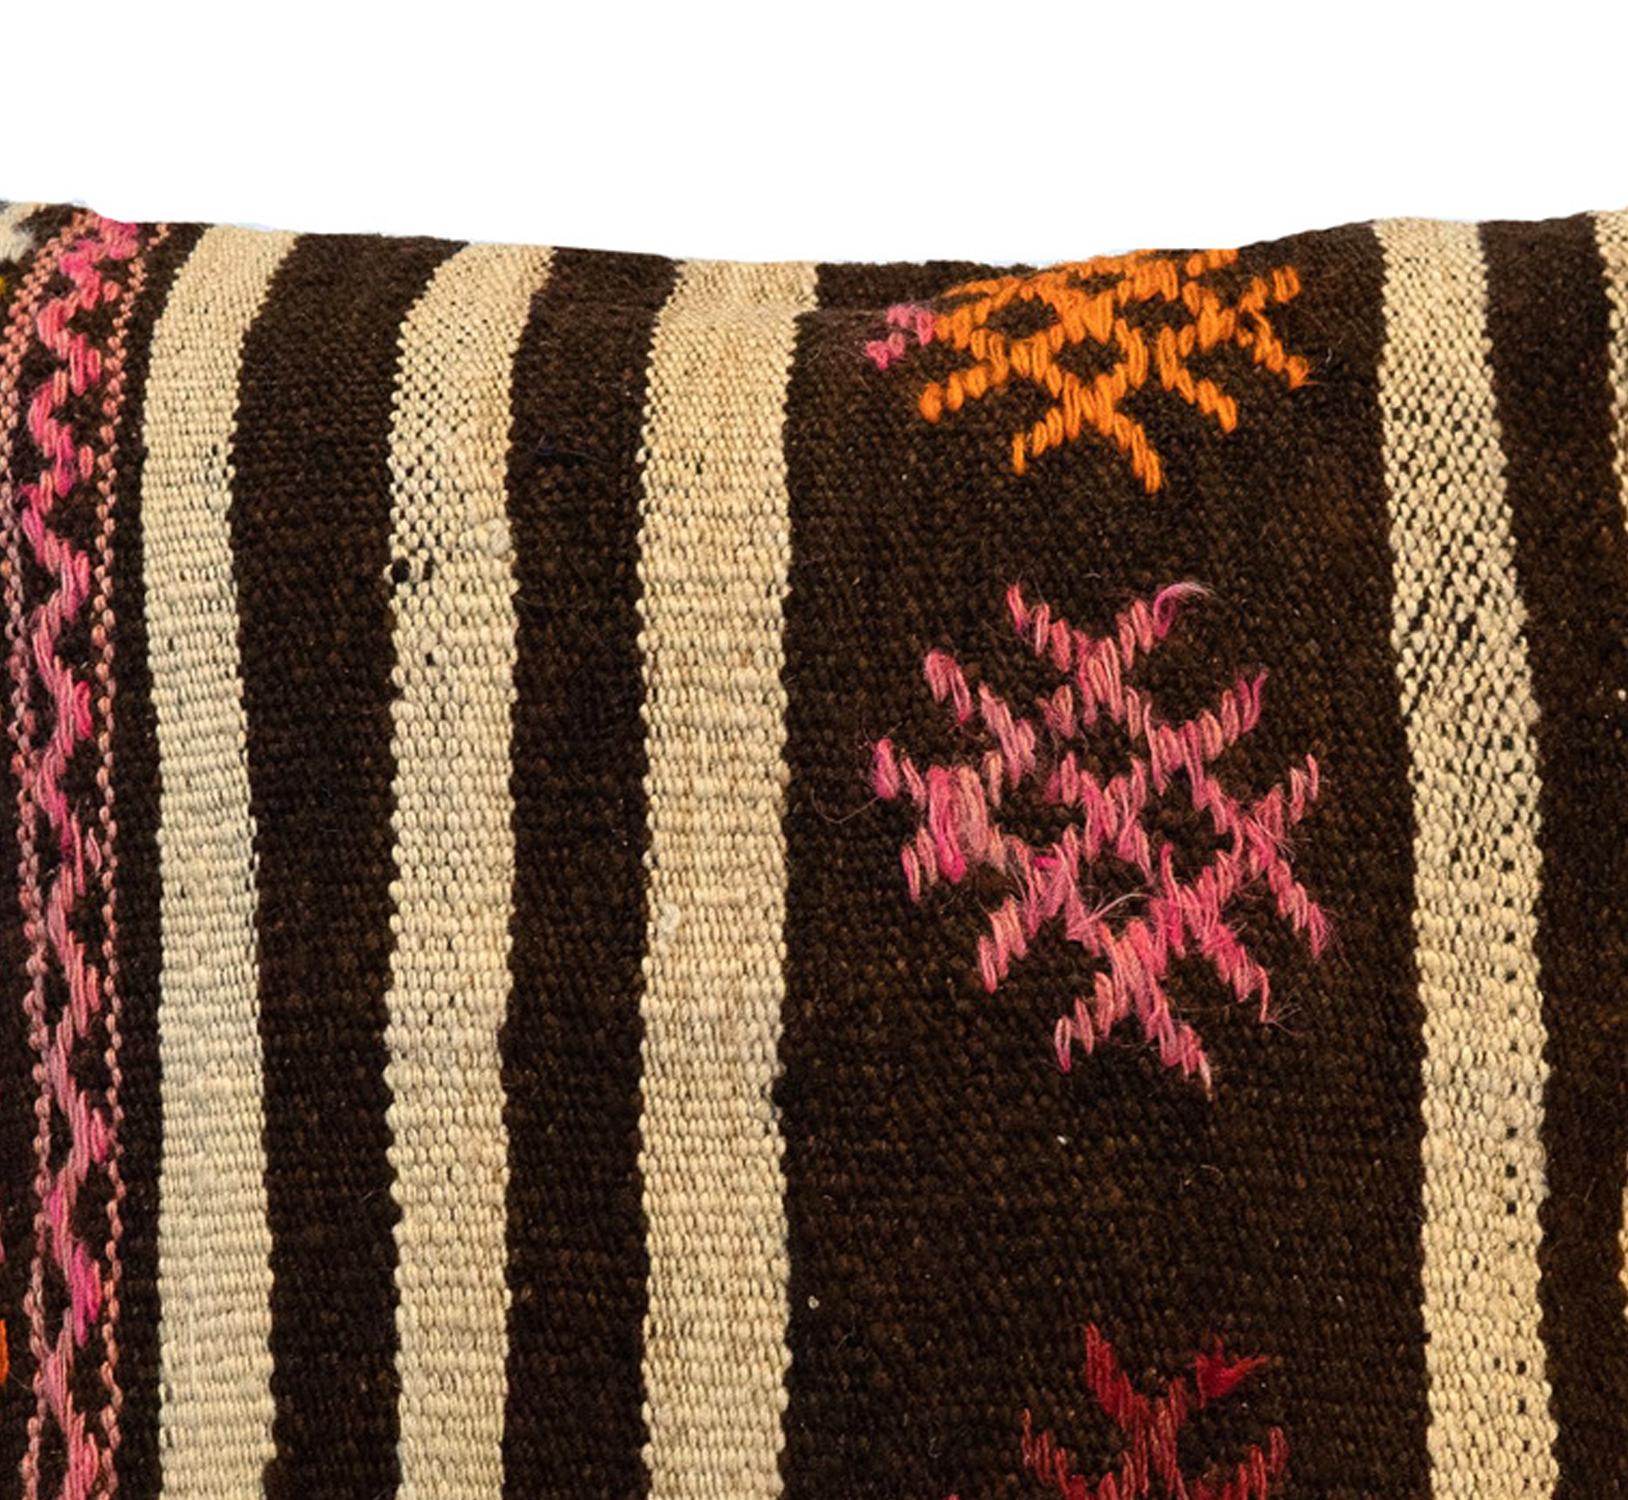 Vegetable Dyed Kilim Cushion Cover Handwoven Oriental Wool Scatter Cushion Brown Pink